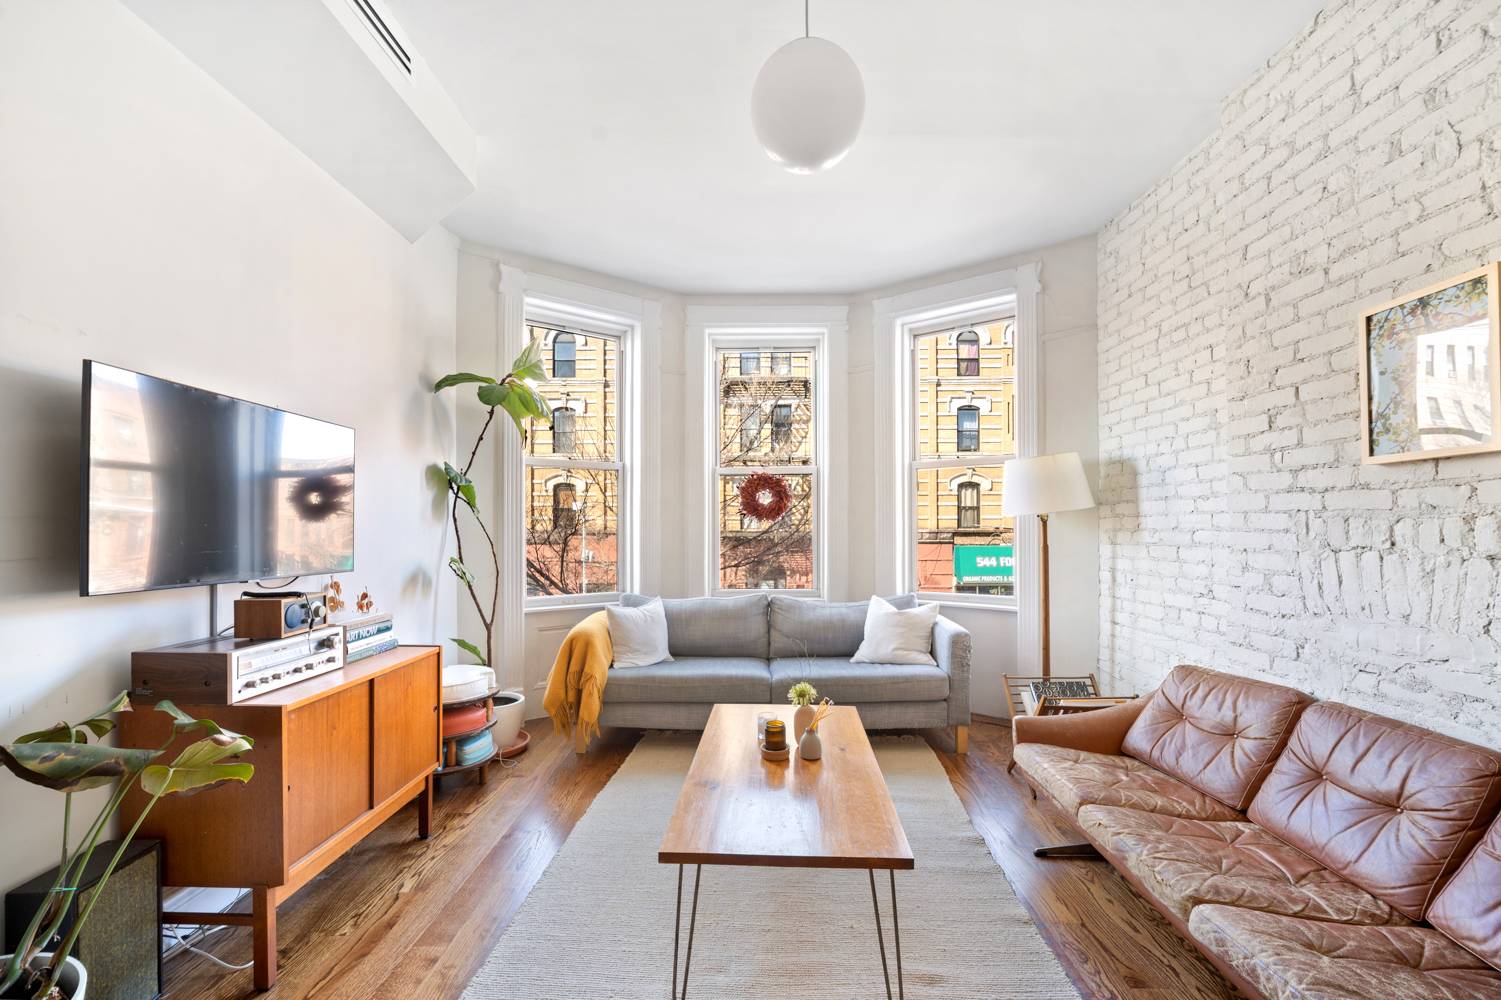 Welcome home to this newly renovated 3 bedroom apartment in the heart of Bed Stuy on a lovely, tree lined street.